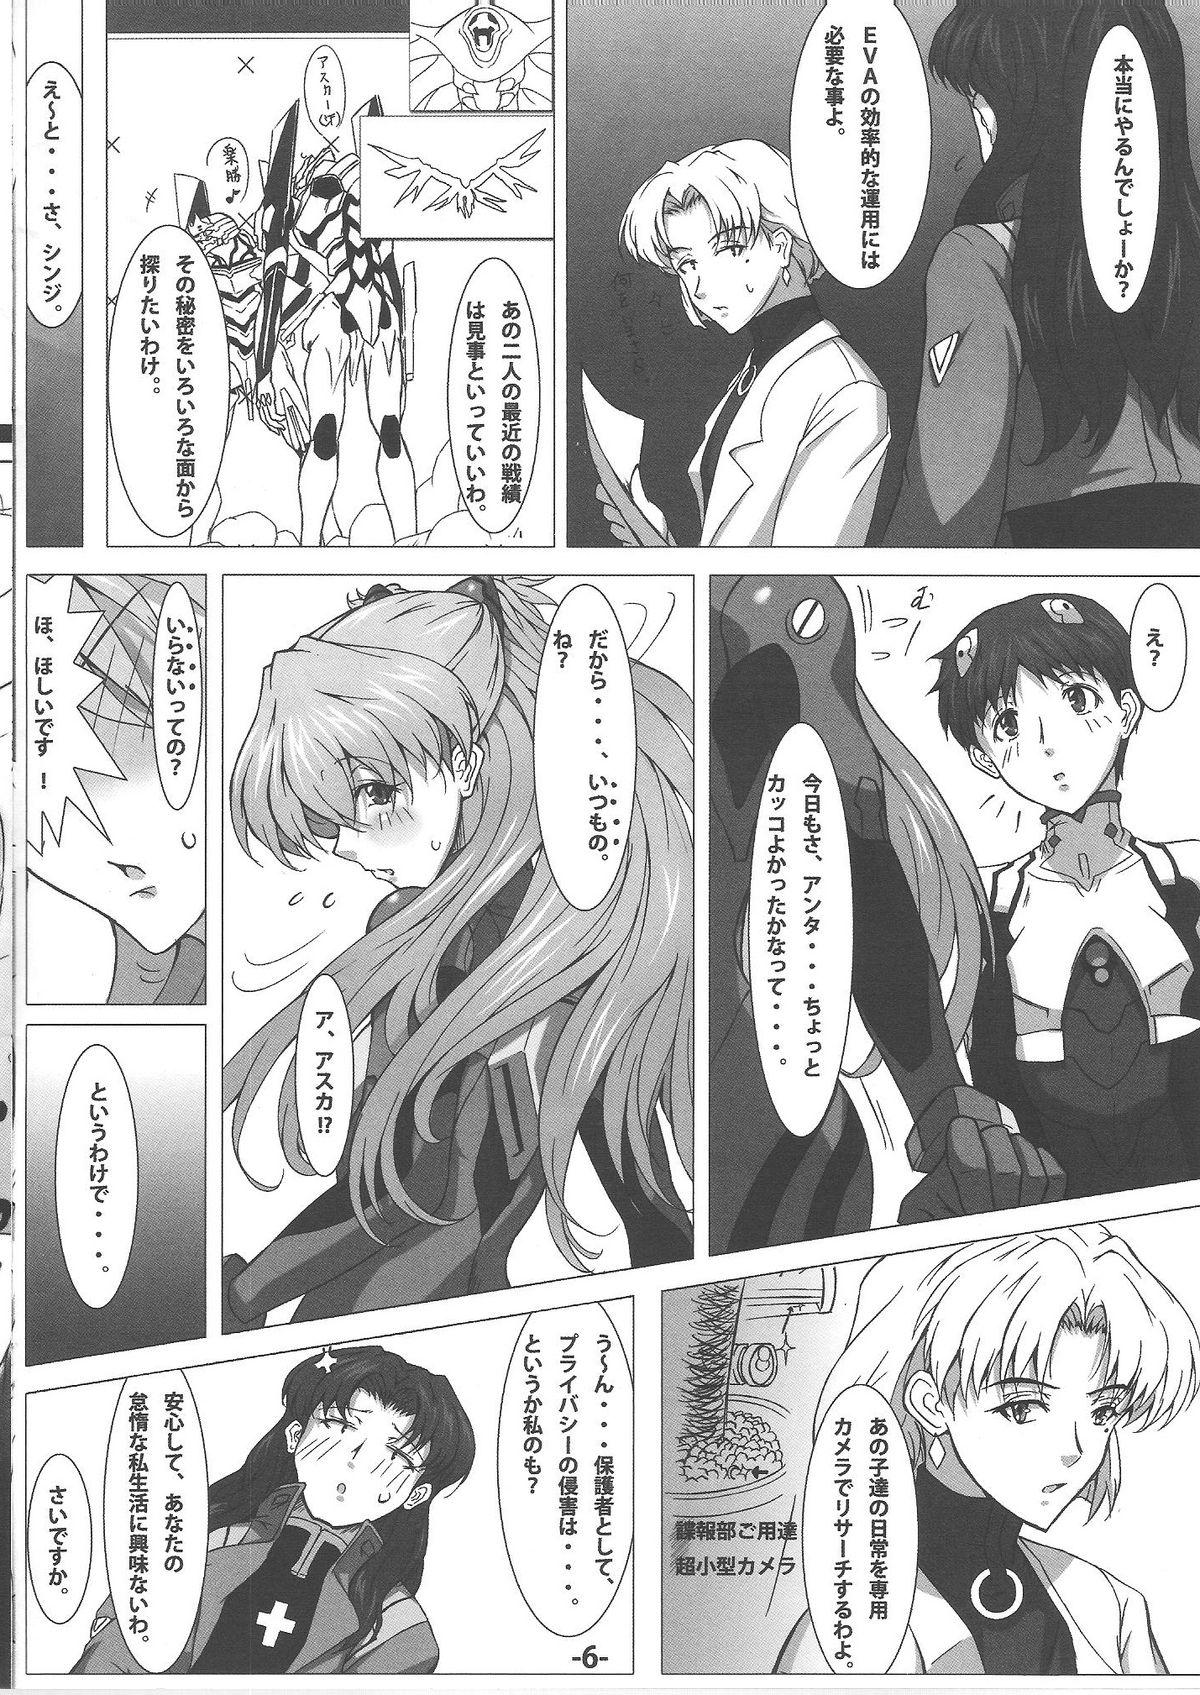 Riding Synchro Rate 200% !! - Neon genesis evangelion Dirty - Page 7